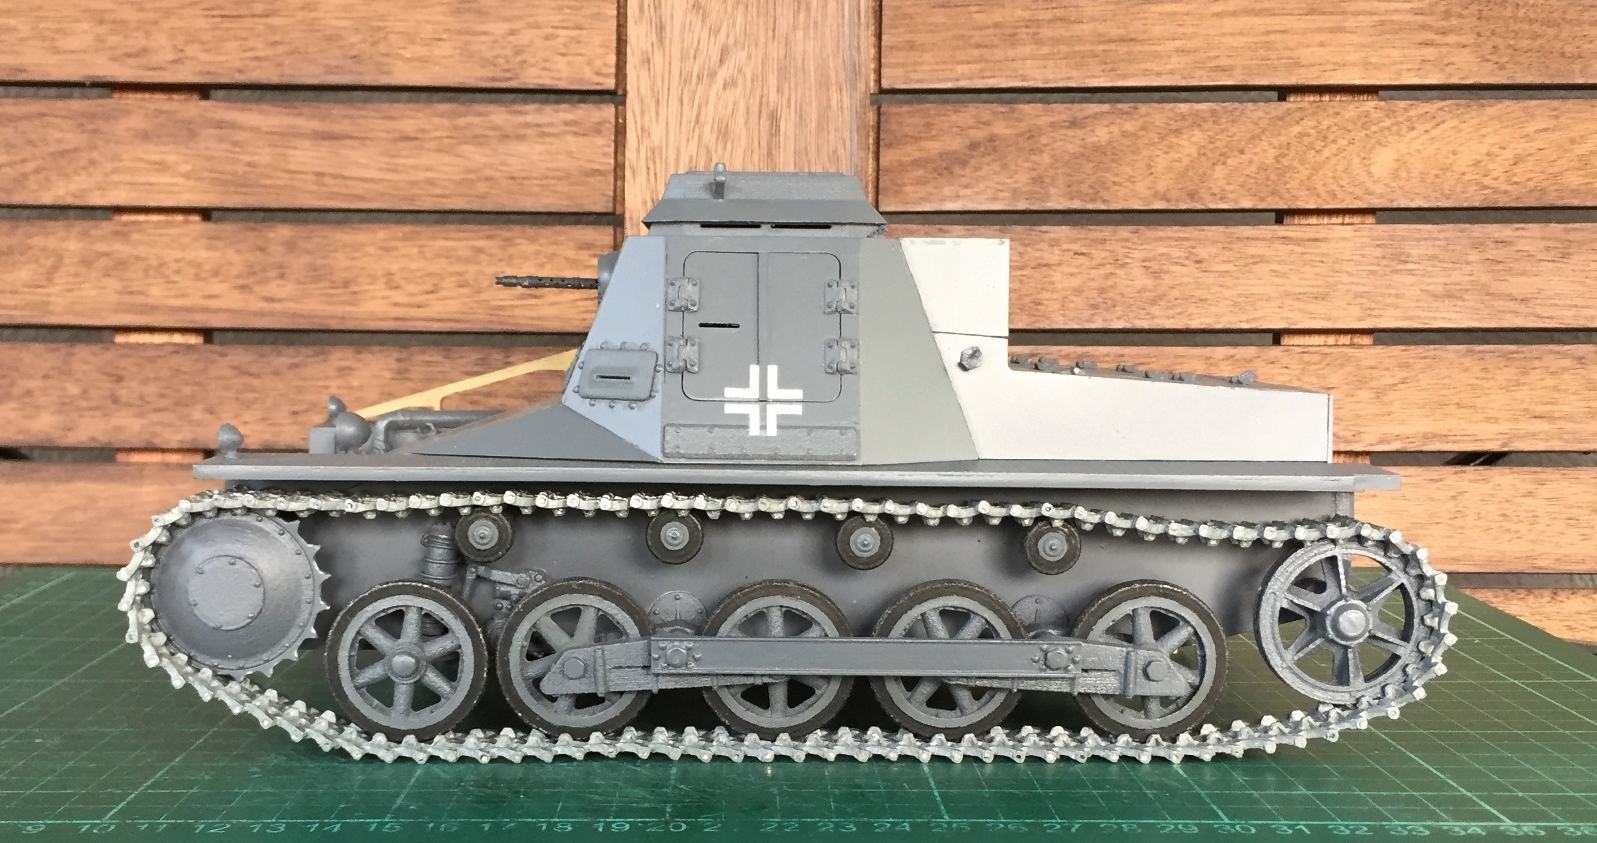 rc military tank for sale